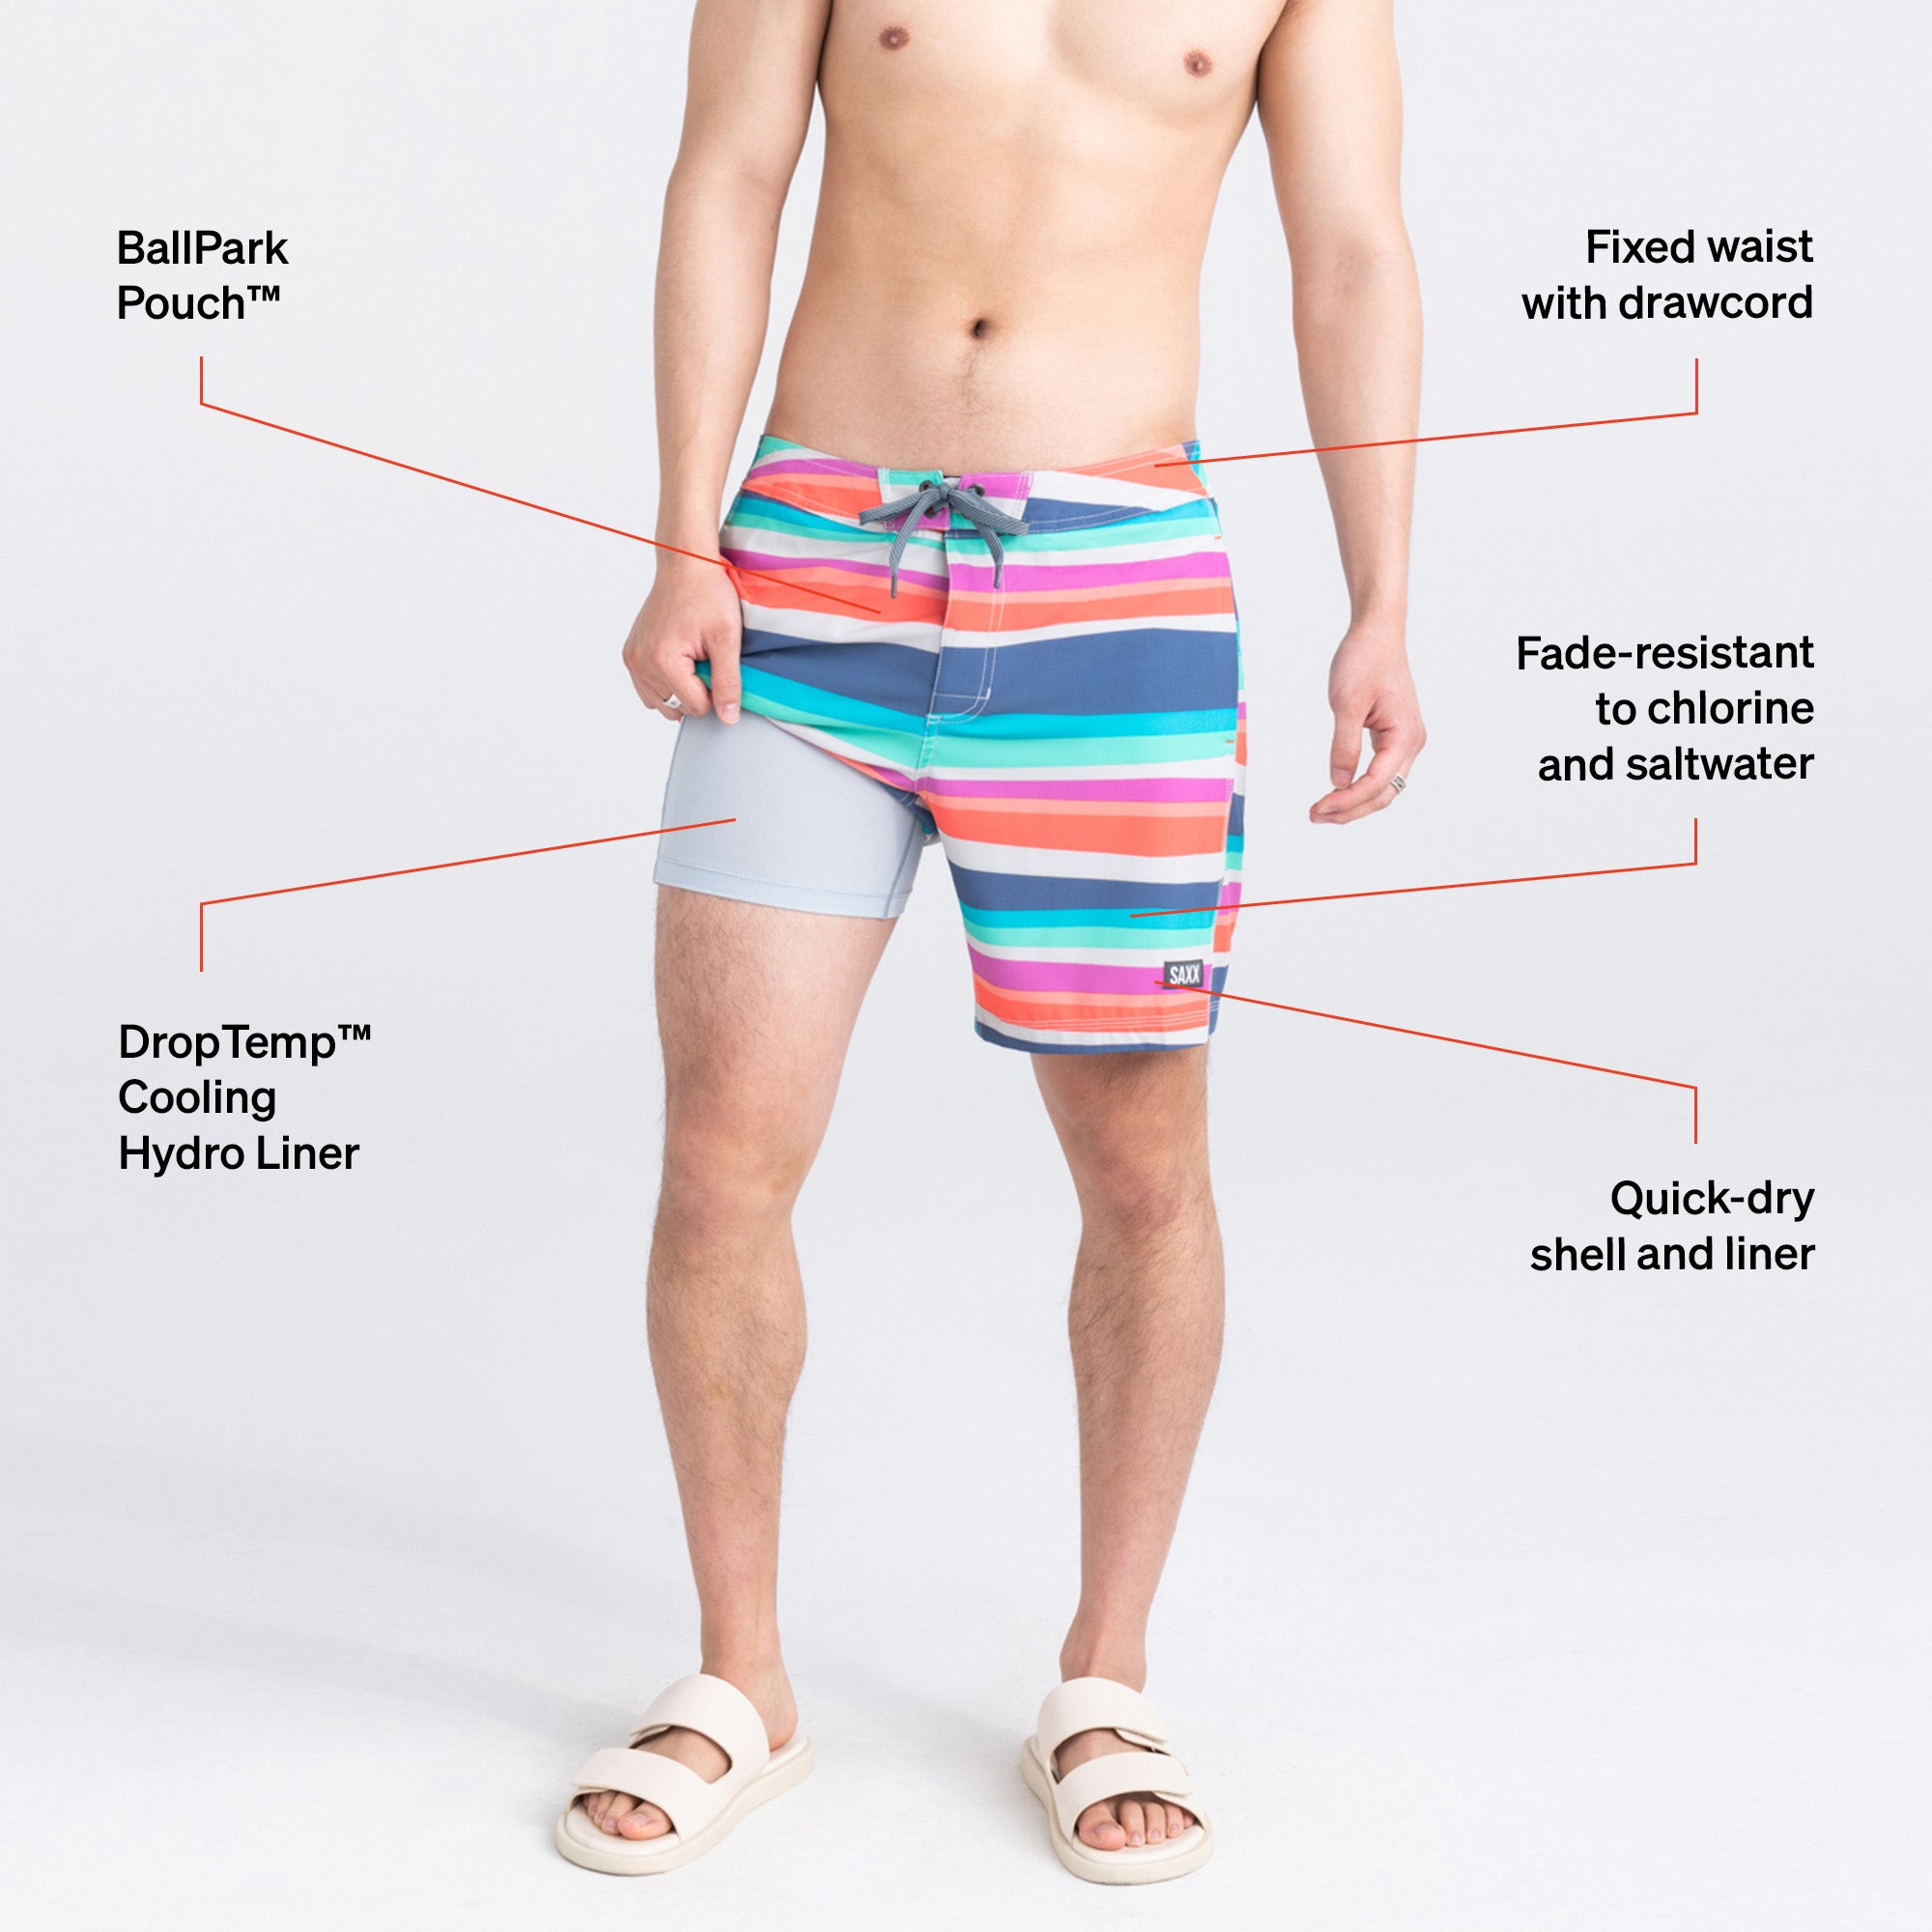 Man in striped swim shorts and sandals lifting short leg to reveal liner